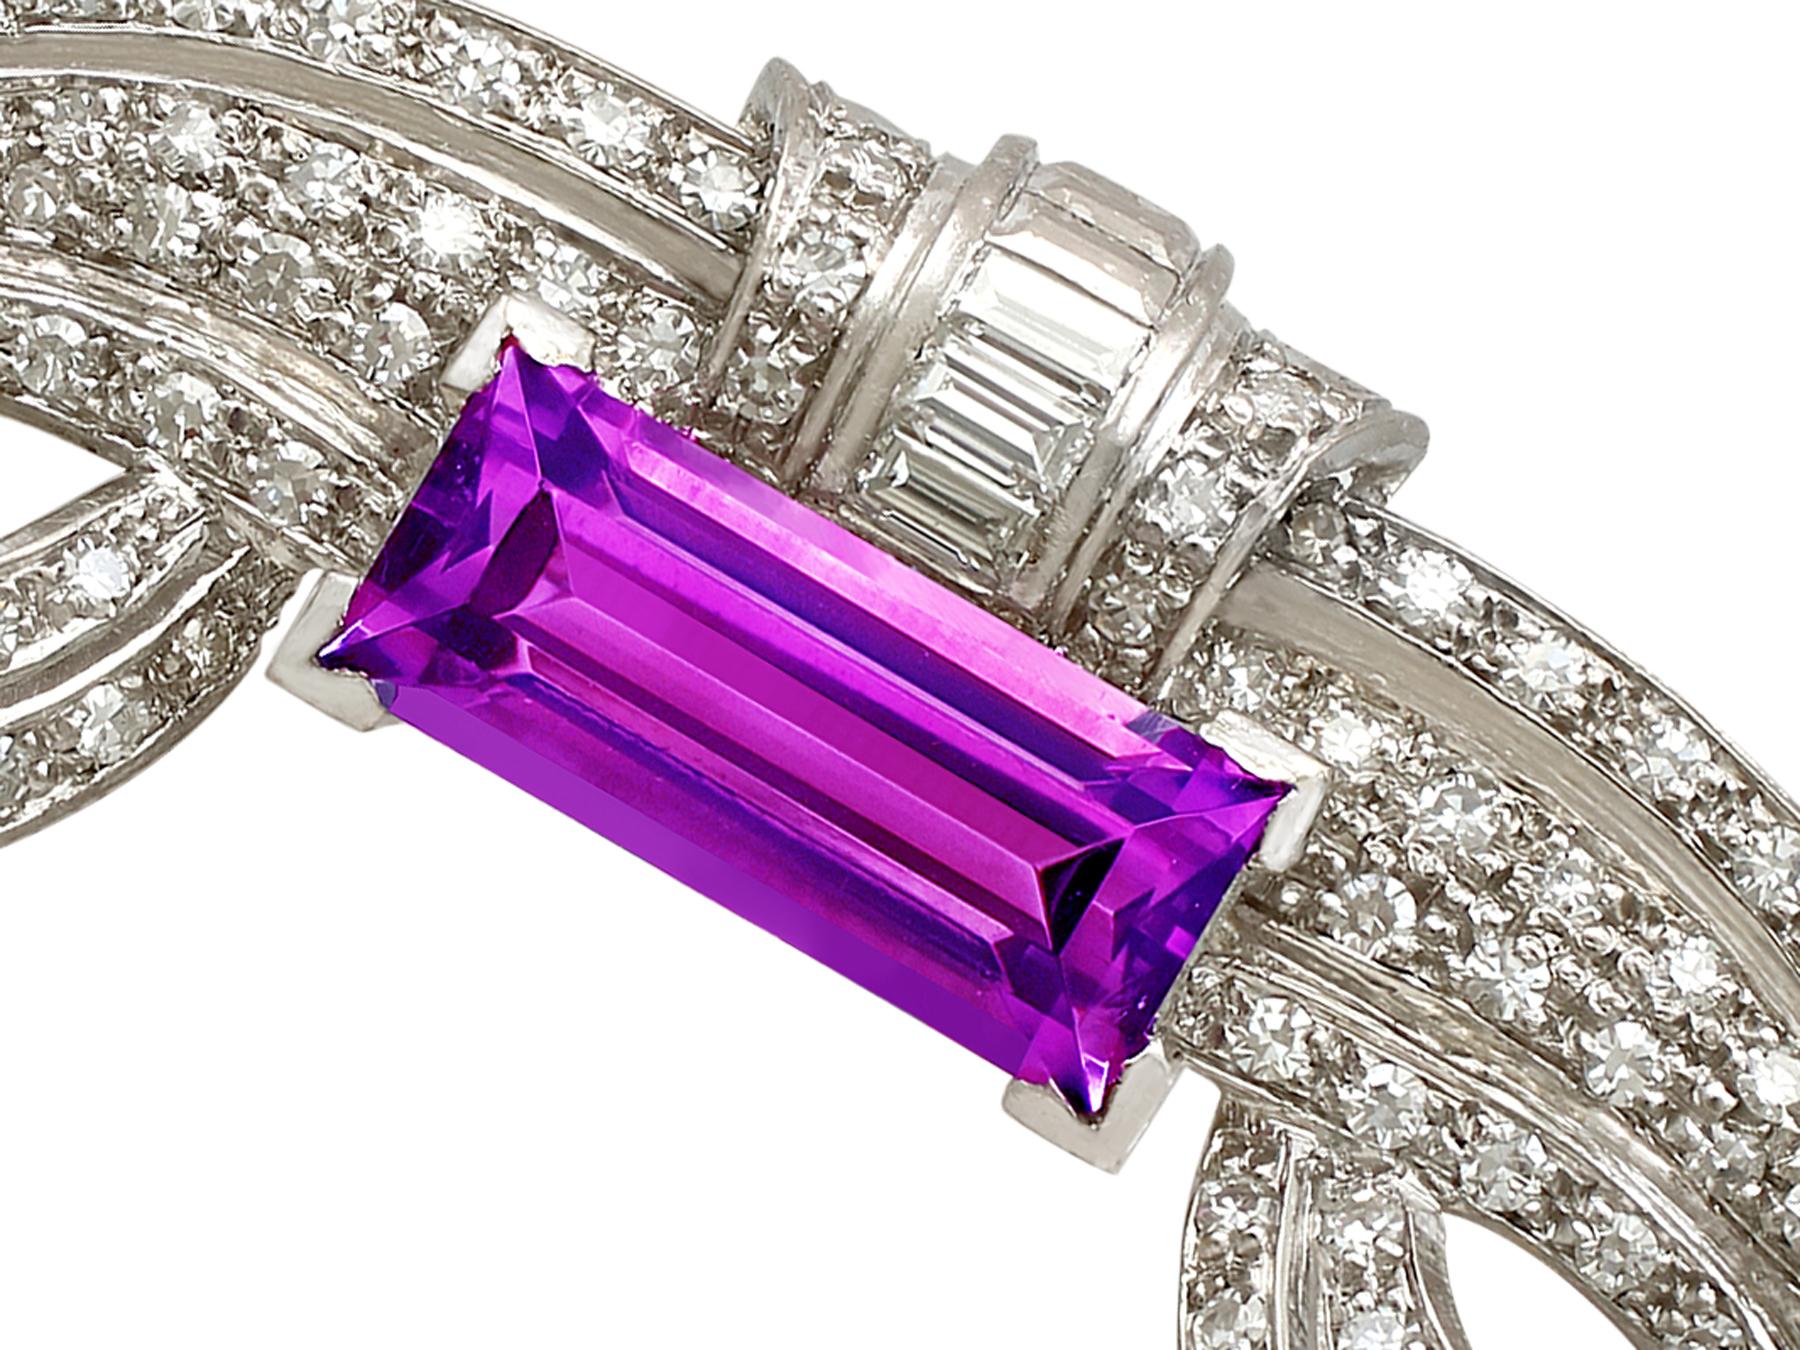 A stunning vintage Art Deco 3.66 carat amethyst and 2.65 carat diamond, platinum brooch; part of our diverse vintage jewelry and estate jewelry collections.

This stunning, fine and impressive vintage amethyst brooch has been crafted in